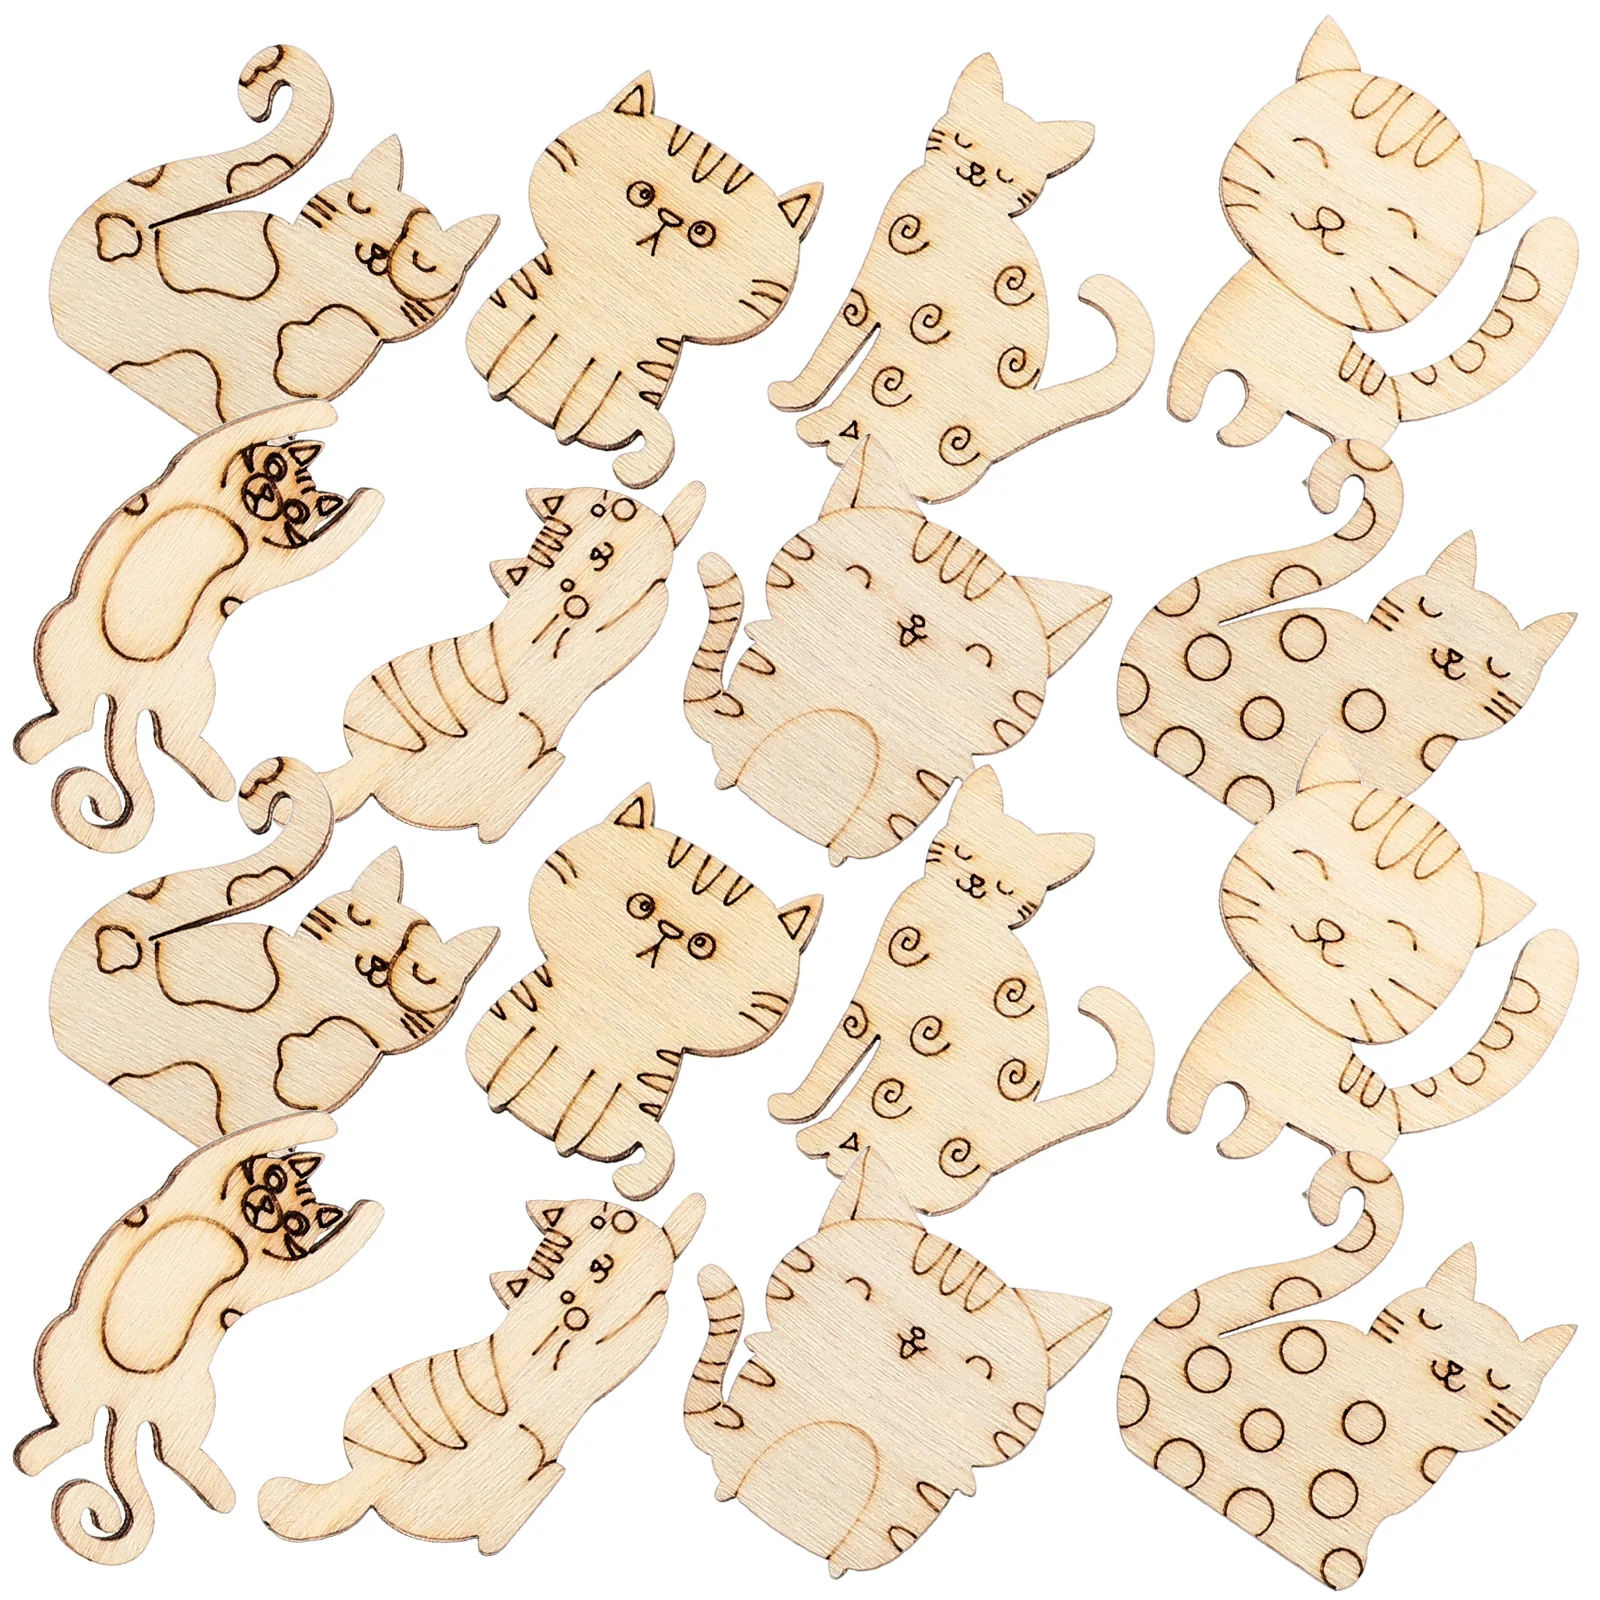 

100 Pcs Wood Cat Embellishments Unfinished Cutout DIY Chips Wooden Tags Slices Graffiti Playset Cutouts Label